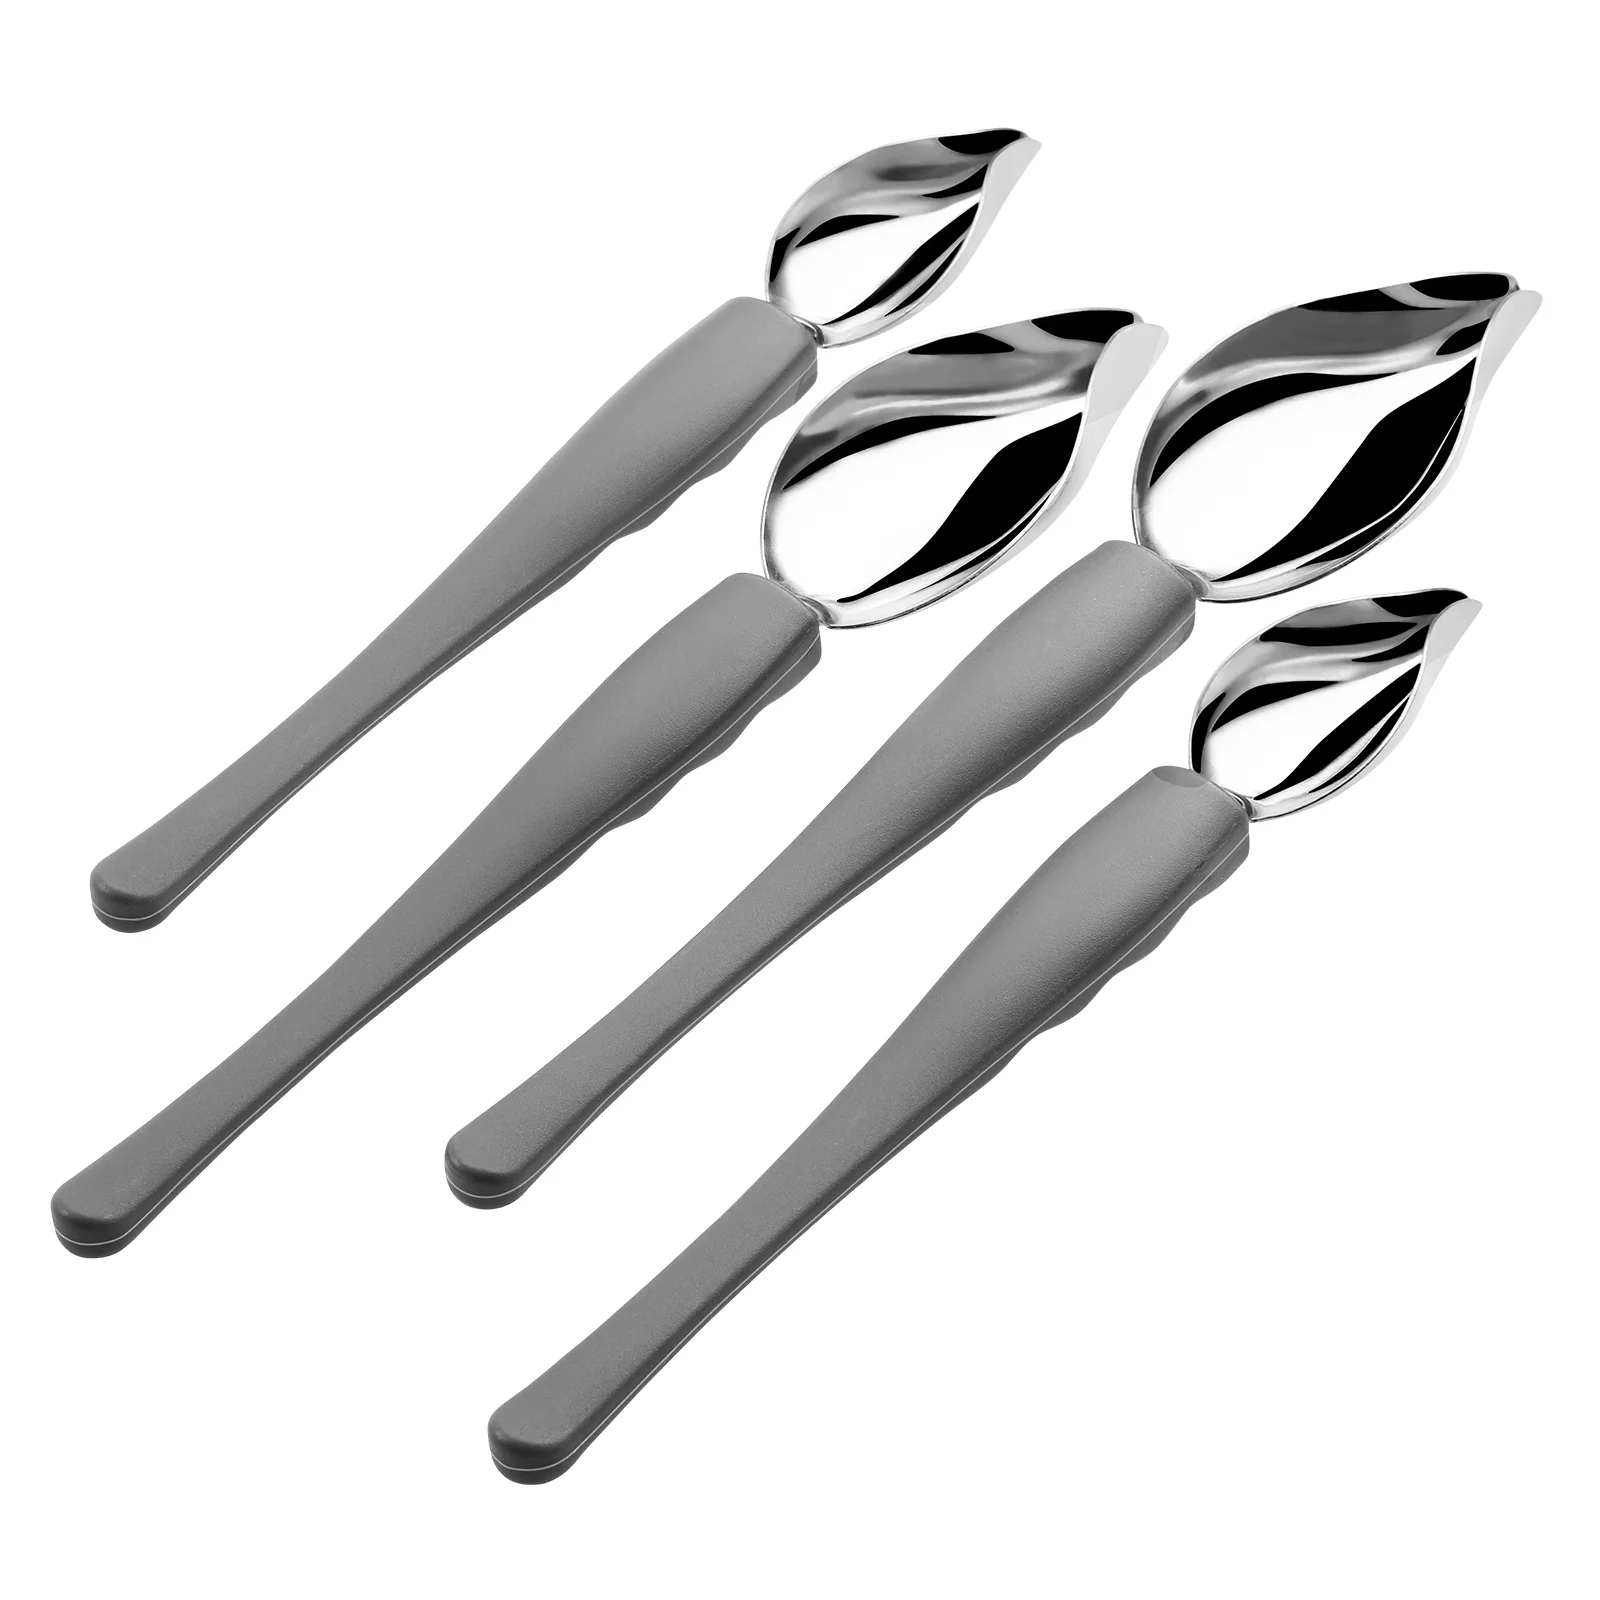 

4pcs Dessert Decorating Spoons Chocolate Dipping Tools Multipurpose Stainless Steel Spoons Chef Spoons